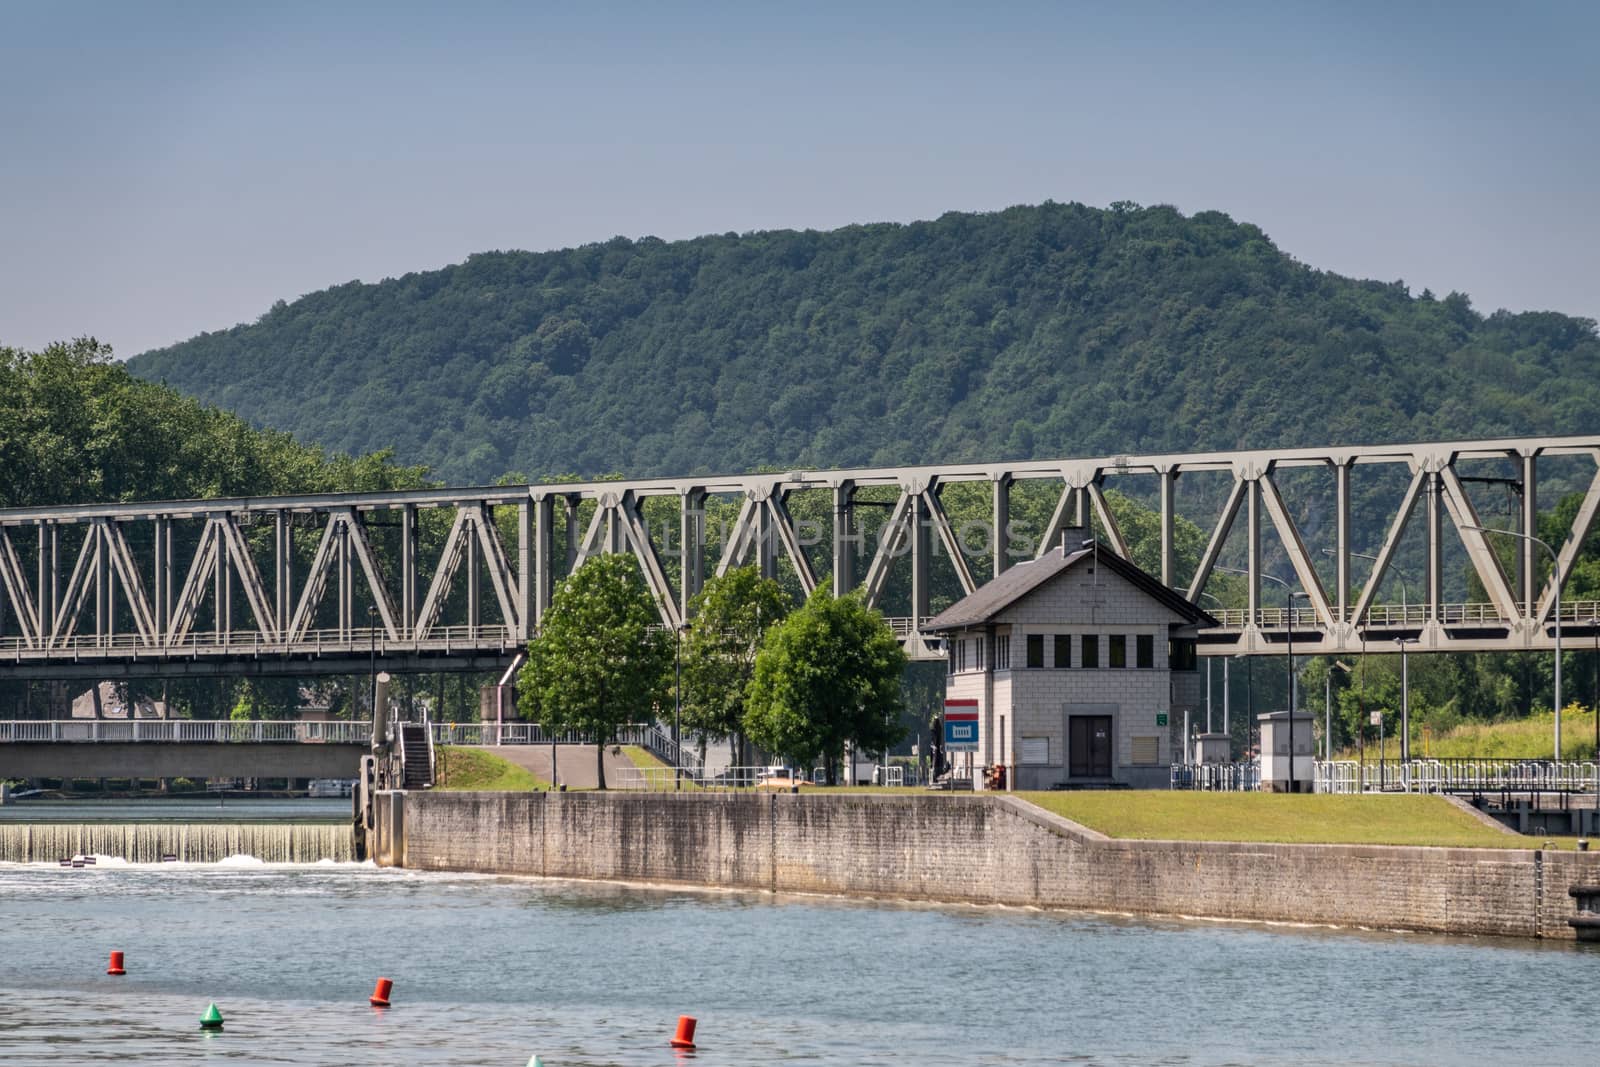 Lock Operator Office on Meuse River, Dinant Belgium. by Claudine